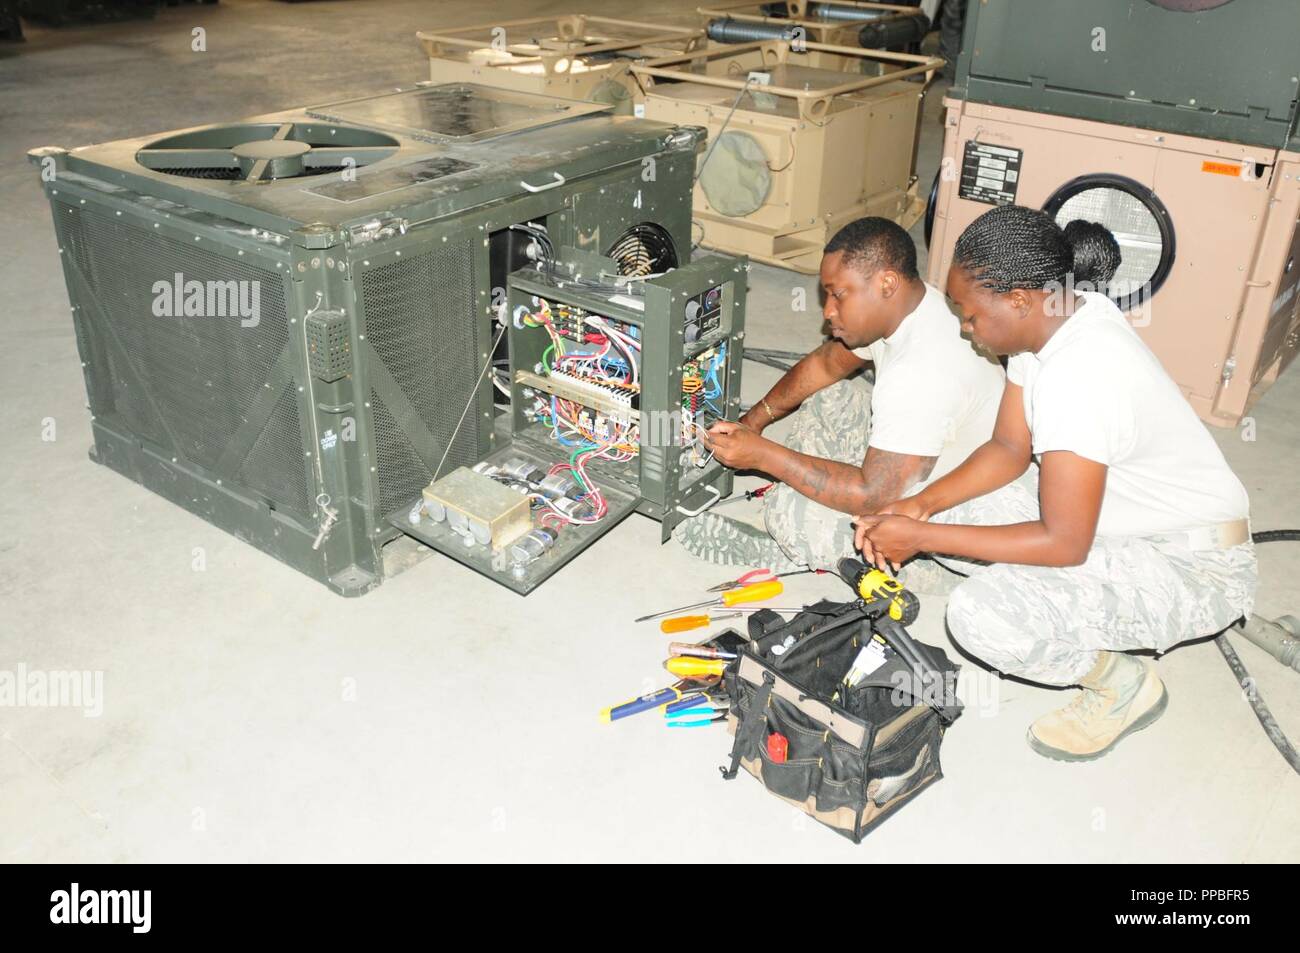 Tech. Sgt. Akil McFarlande, a heating, ventilation, air  condition/refrigeration shop technician and noncommissioned officer in  charge, and airman first class Benjamin St. Brice Jr., a HVAC technician  from the 285th Civil Engineer